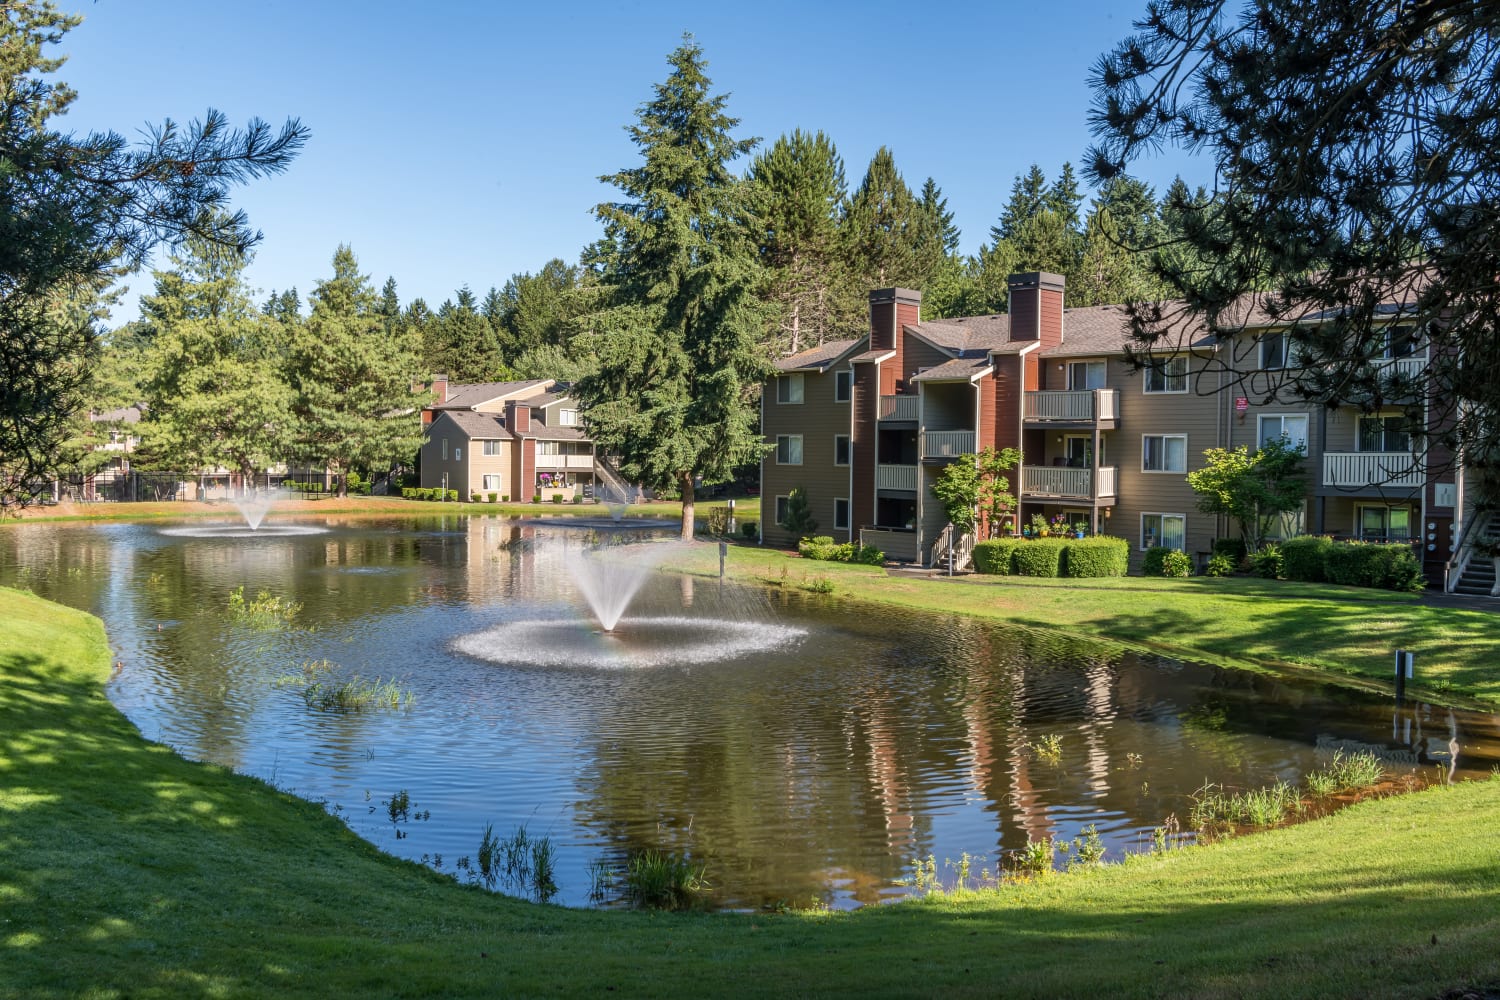 Community green space with pond at The Preserve at Forbes Creek in Kirkland, Washington